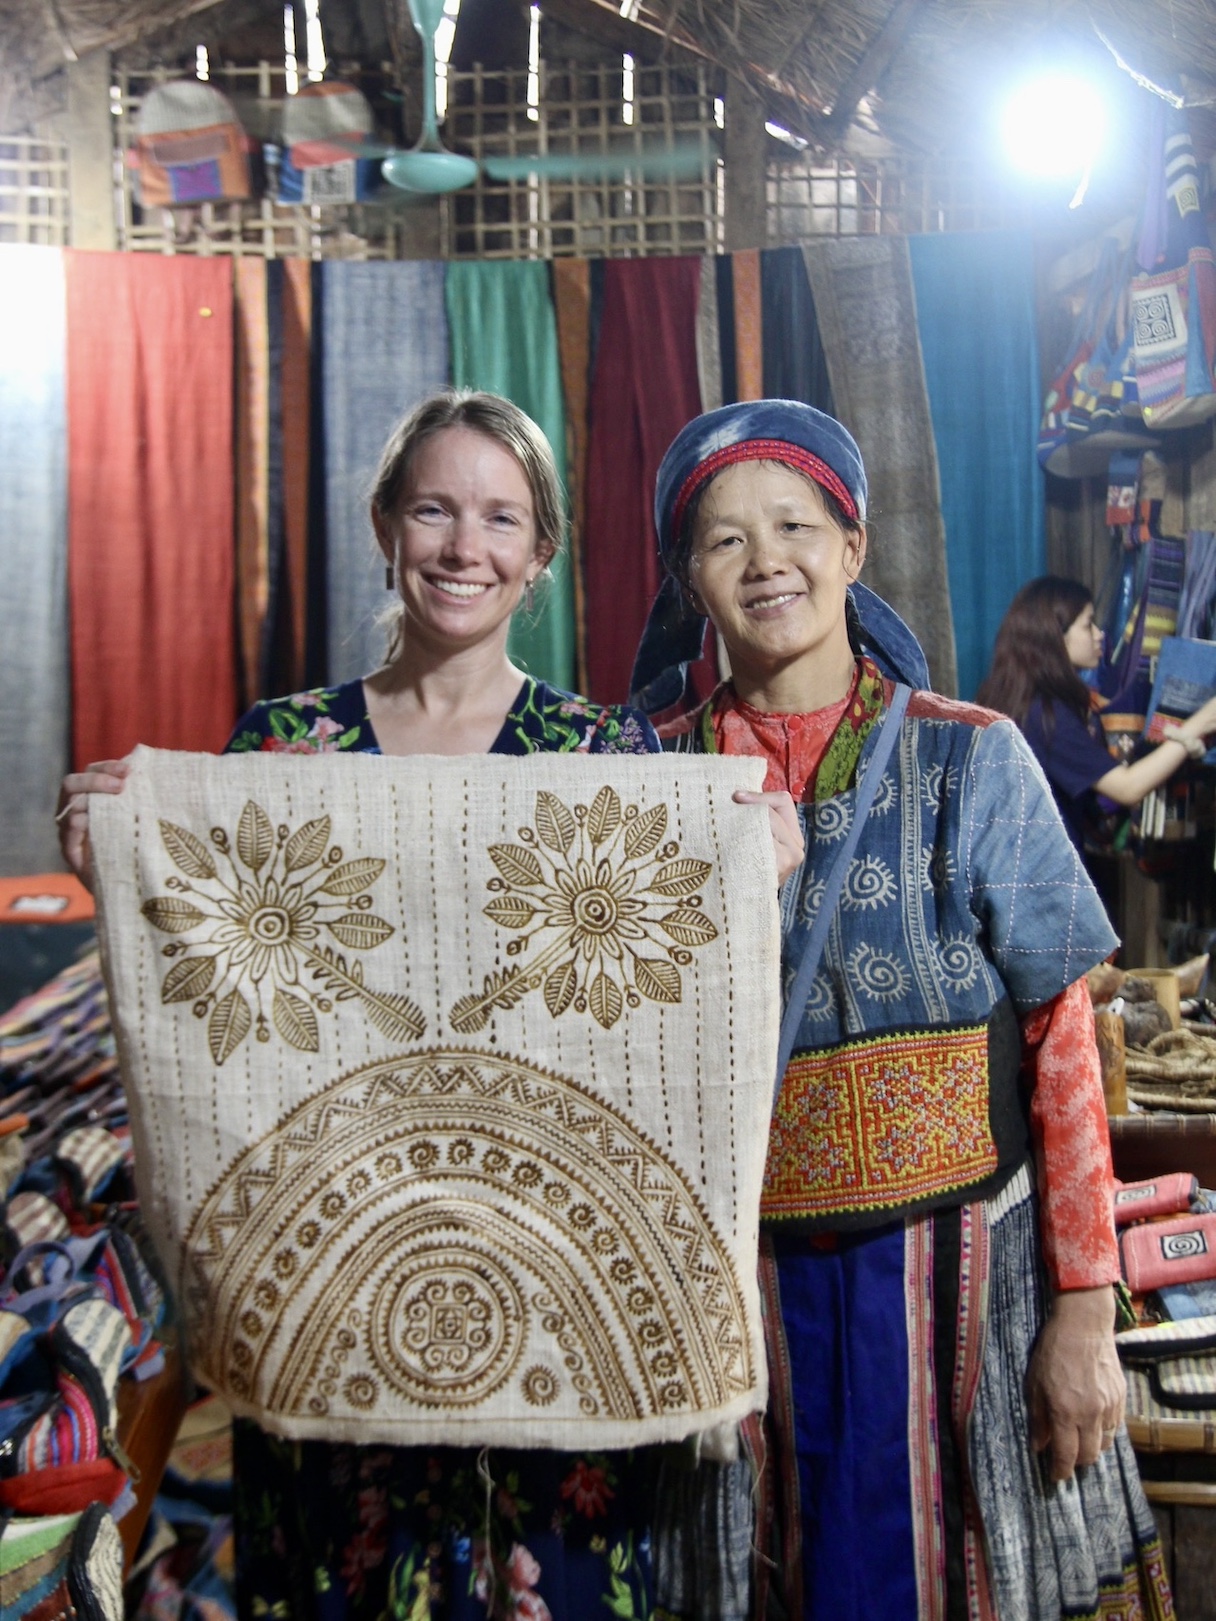 Lungtam Linen Cooperative provides jobs, supports and benefits local artisans. Sustainable Travel Companies are partnerships who help to maintain cultural traditions and foster a sense of pride and ownership among residents. 